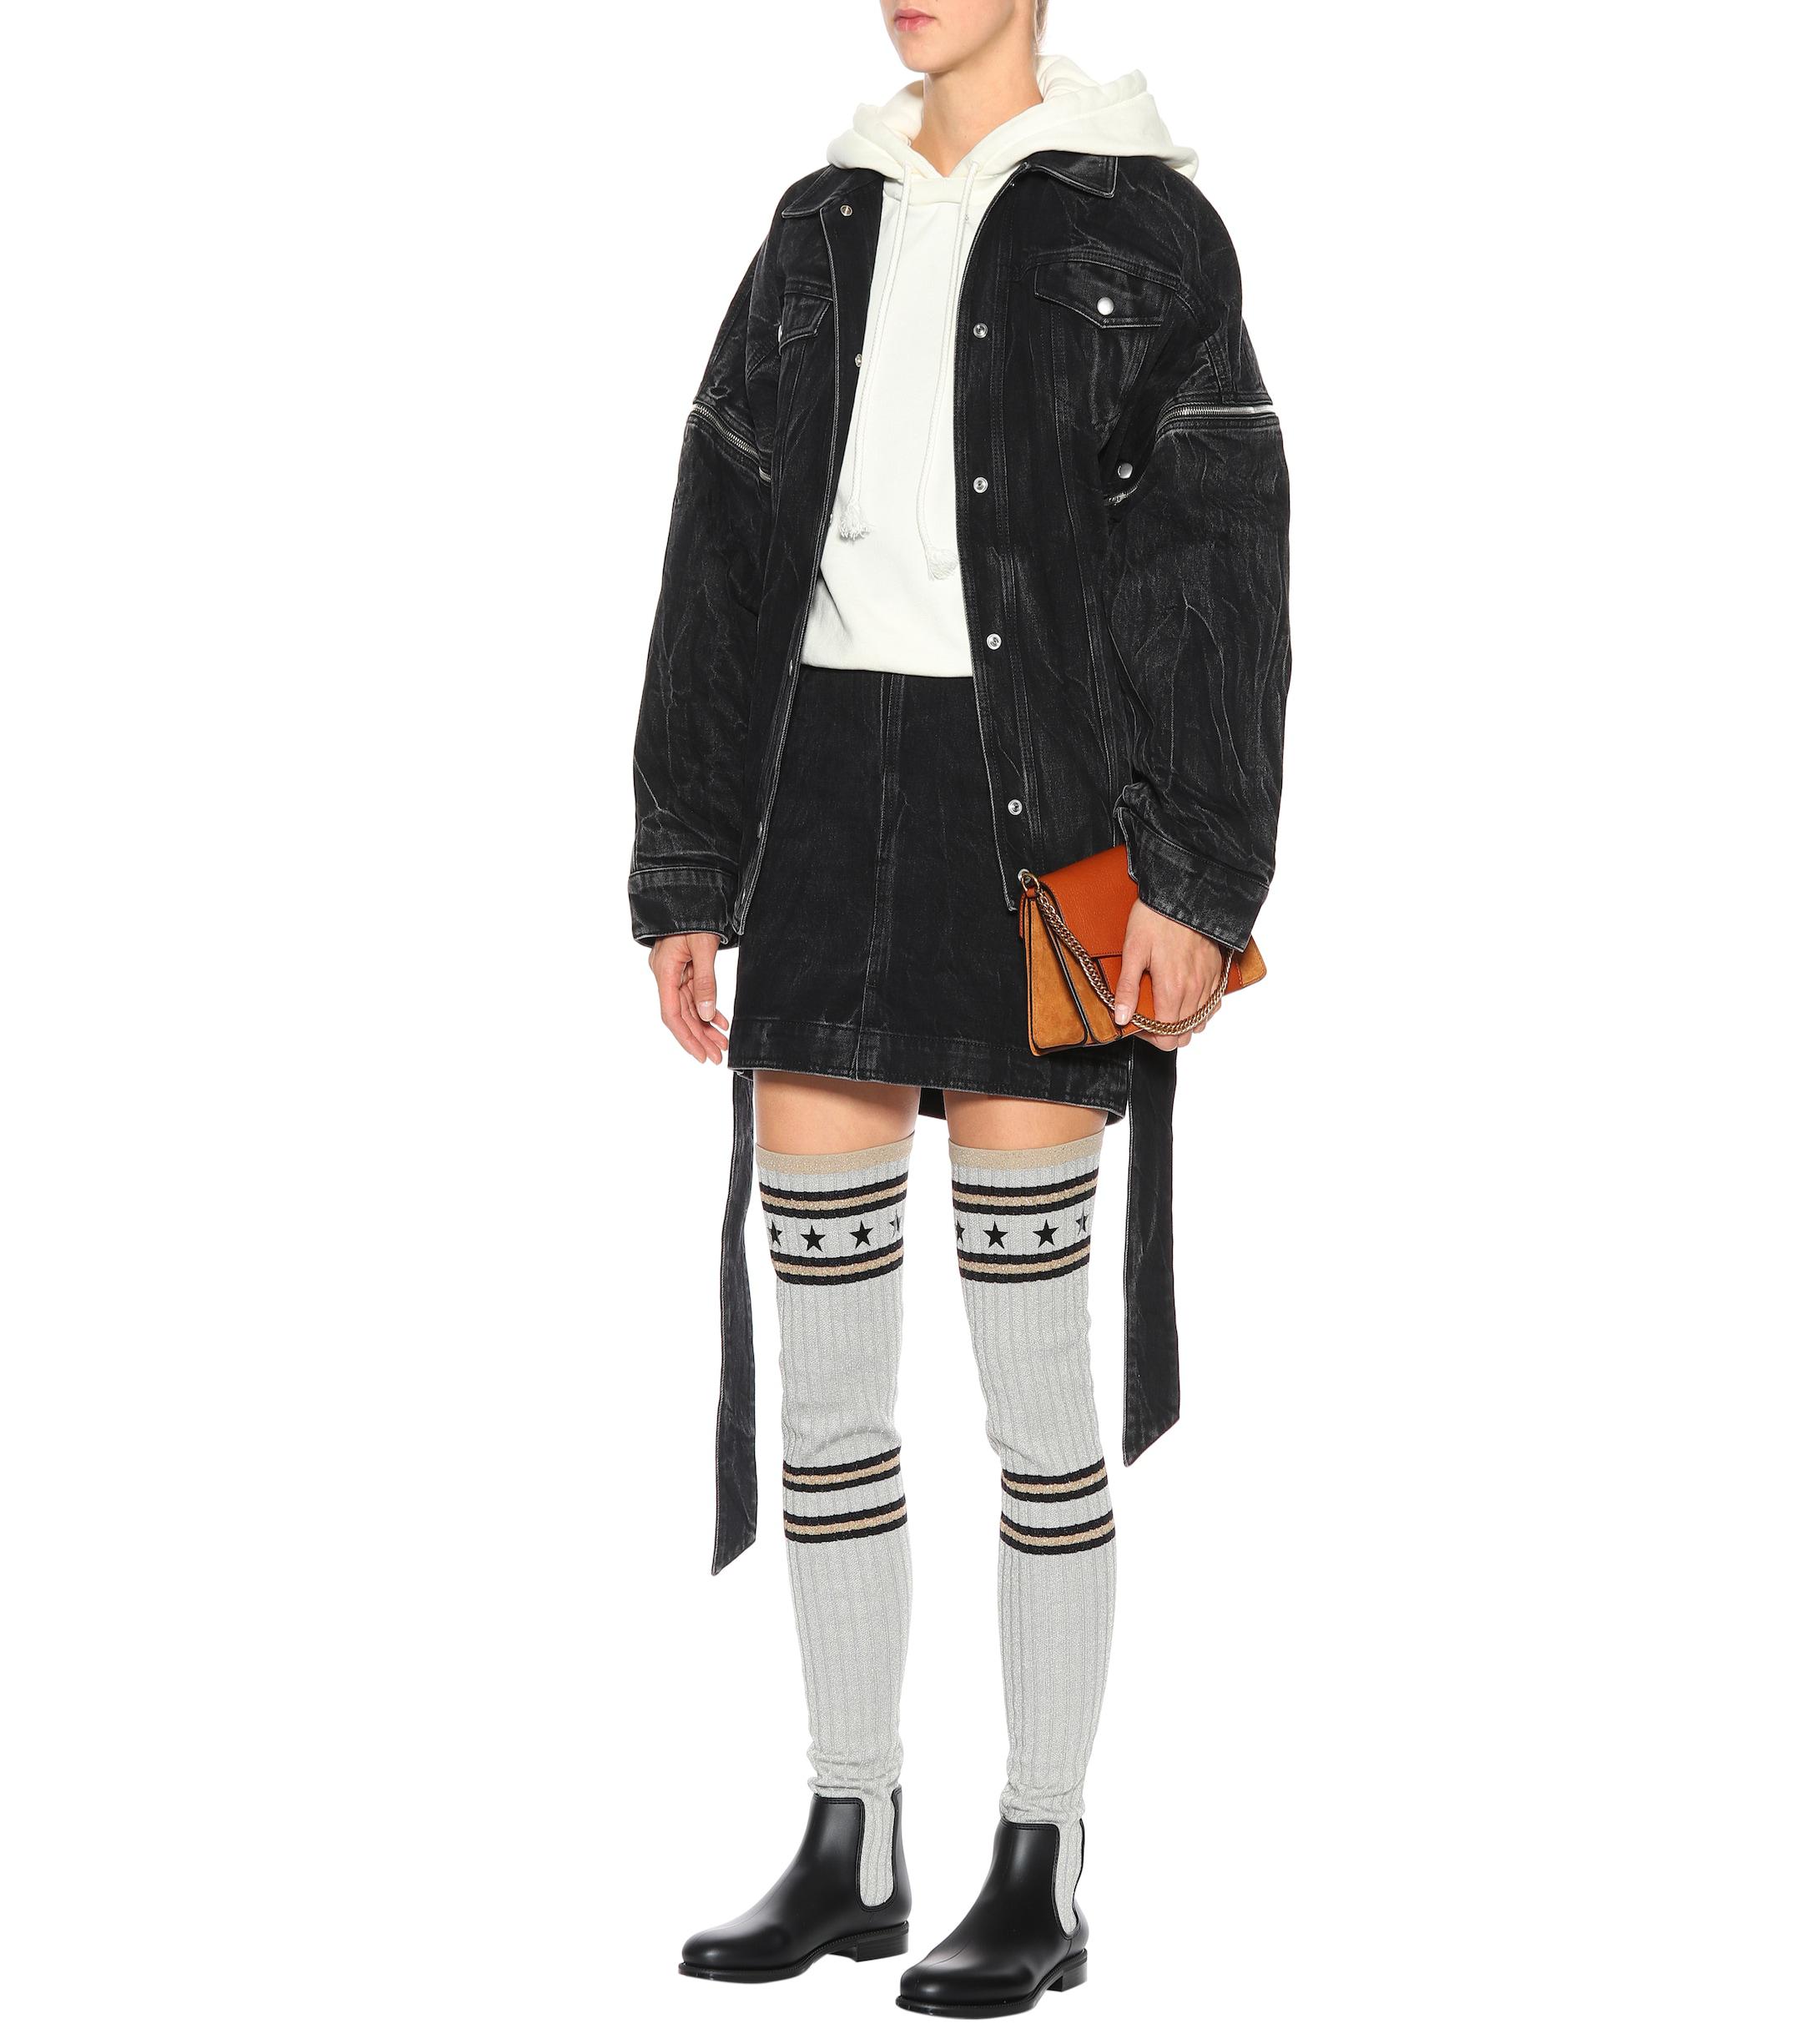 storm over the knee sock boot givenchy